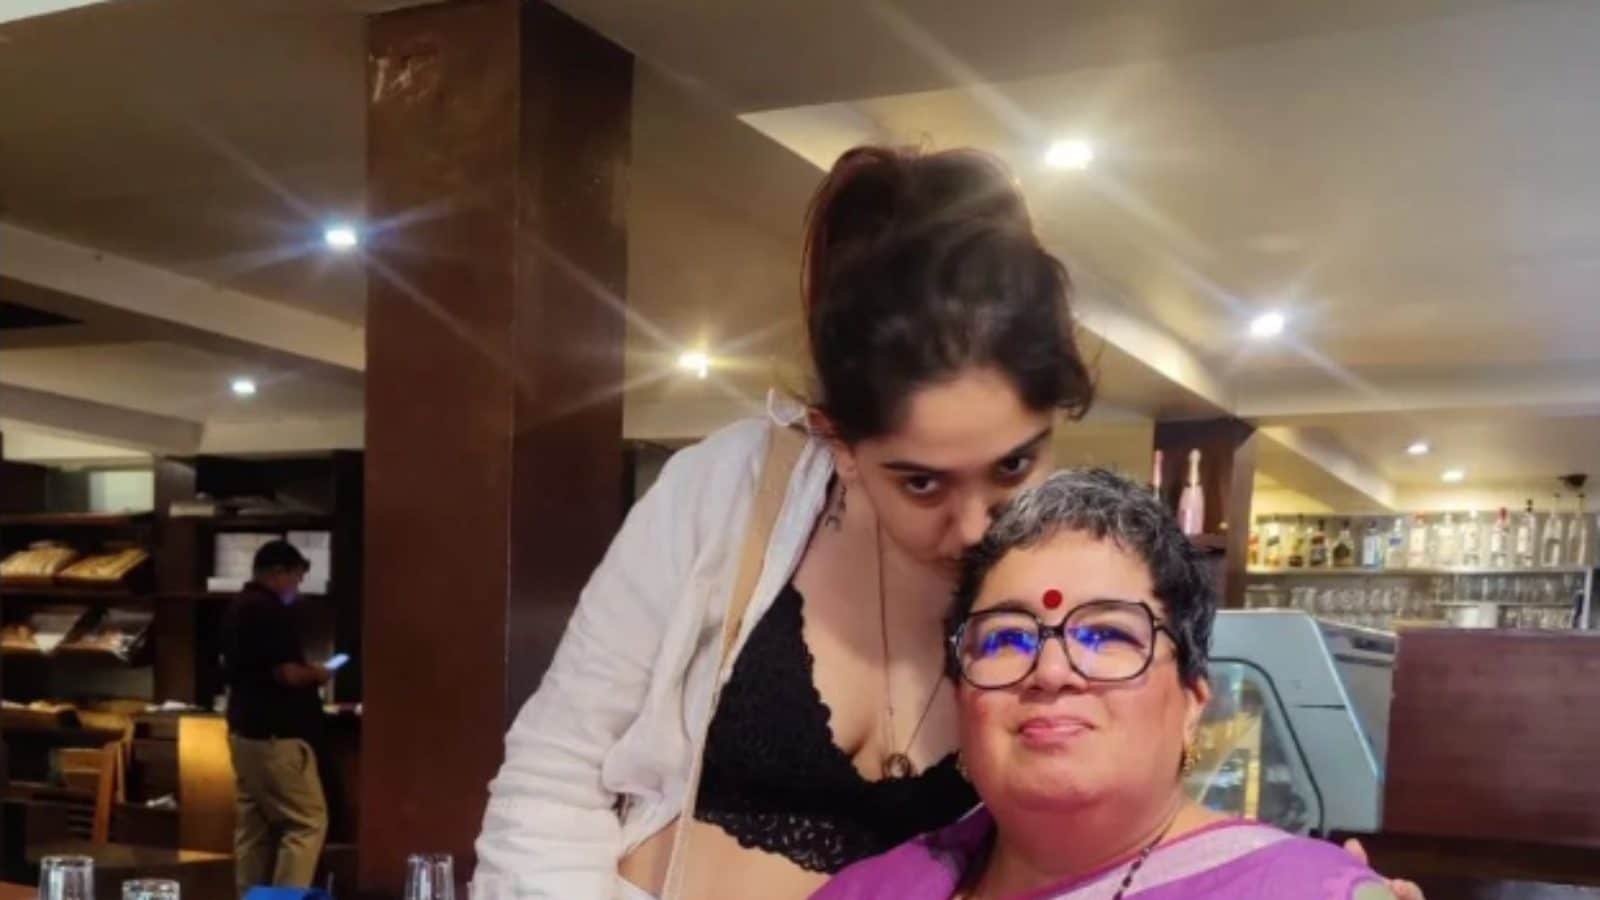 Aamir Khan’s Daughter Ira Khan Kisses Her Mom Reena Dutta on the Forehead in This Adorable Pic